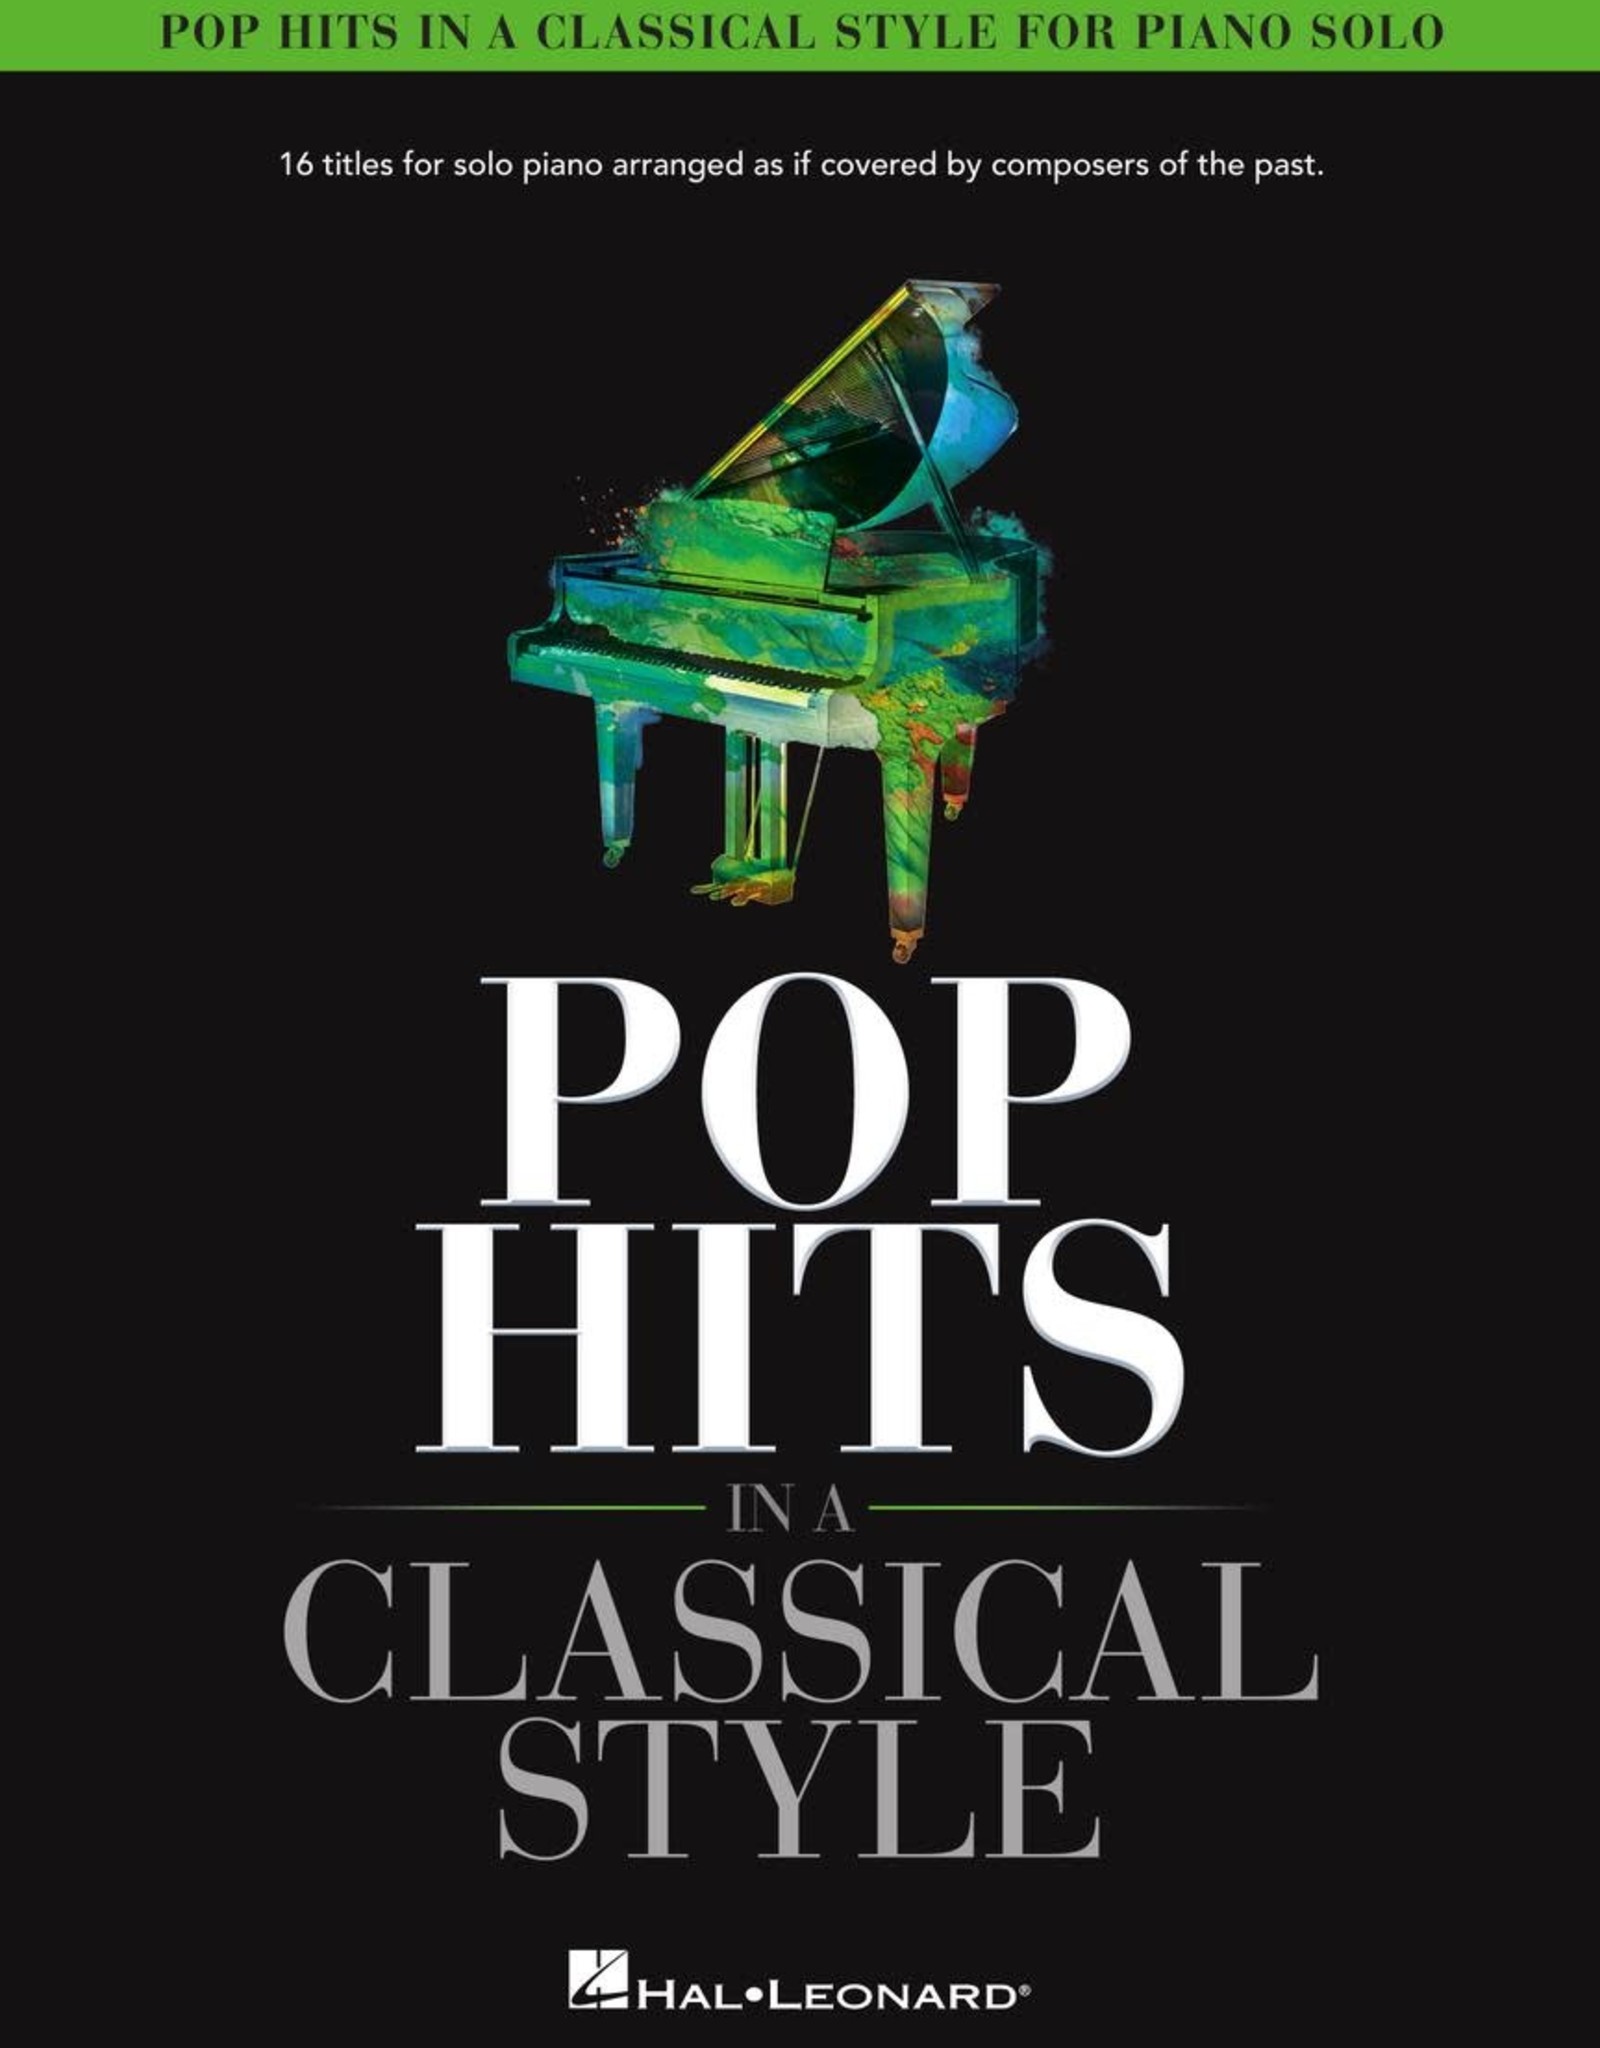 Hal Leonard Pop Hits in a Classical Style